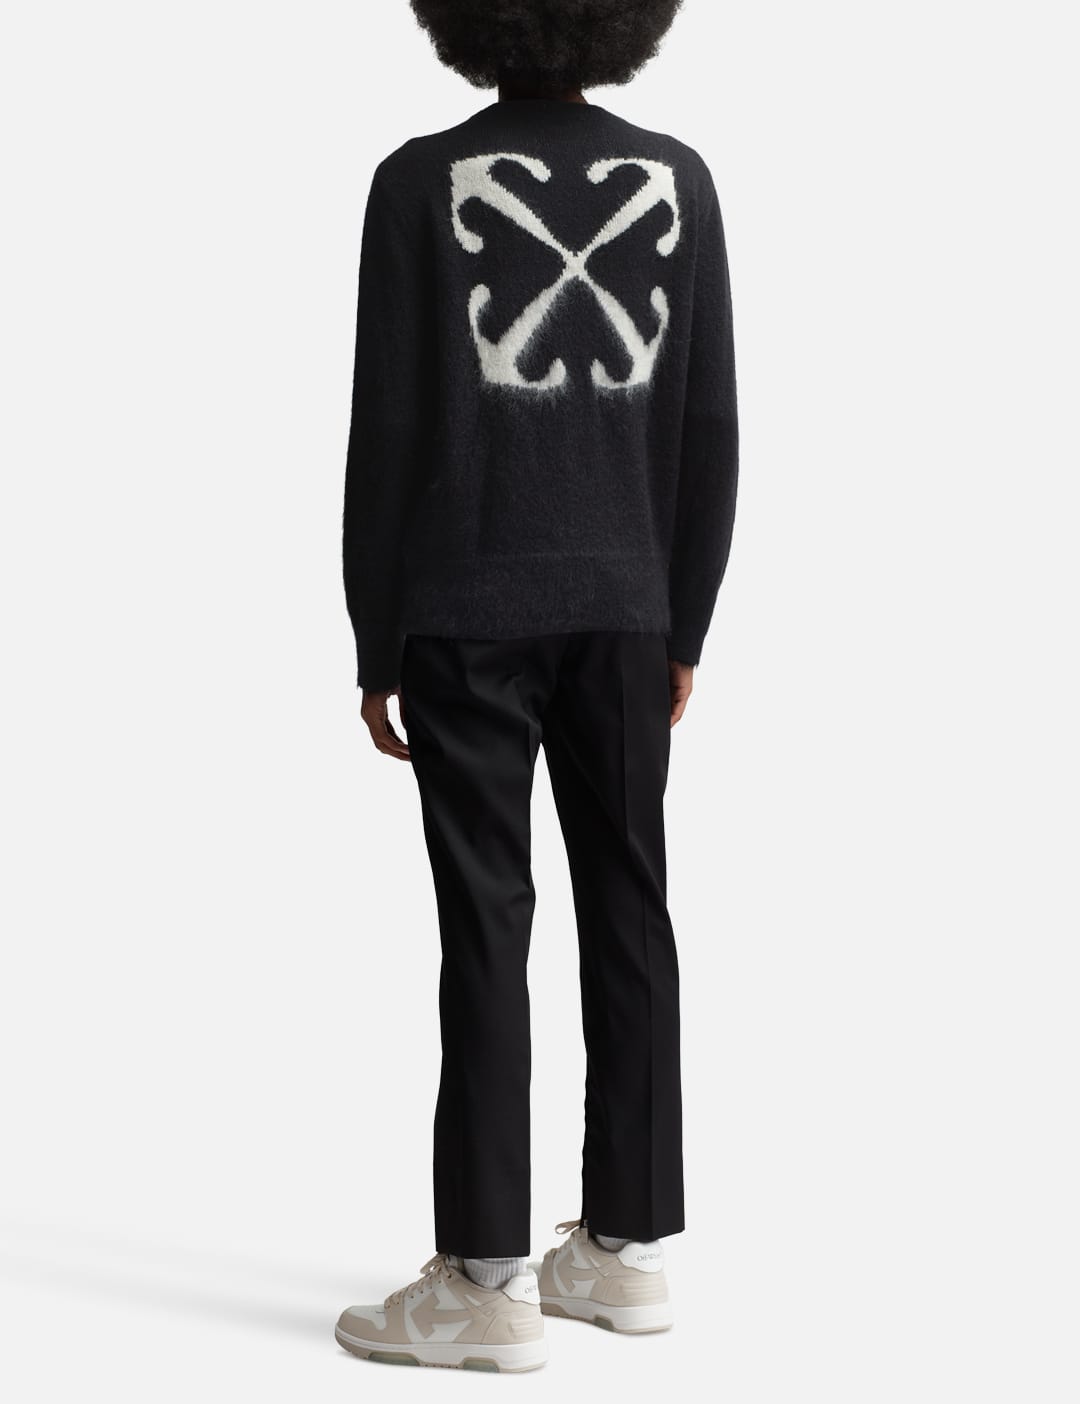 Off White™   Mohair Arrow Knit Crewneck   HBX   Globally Curated